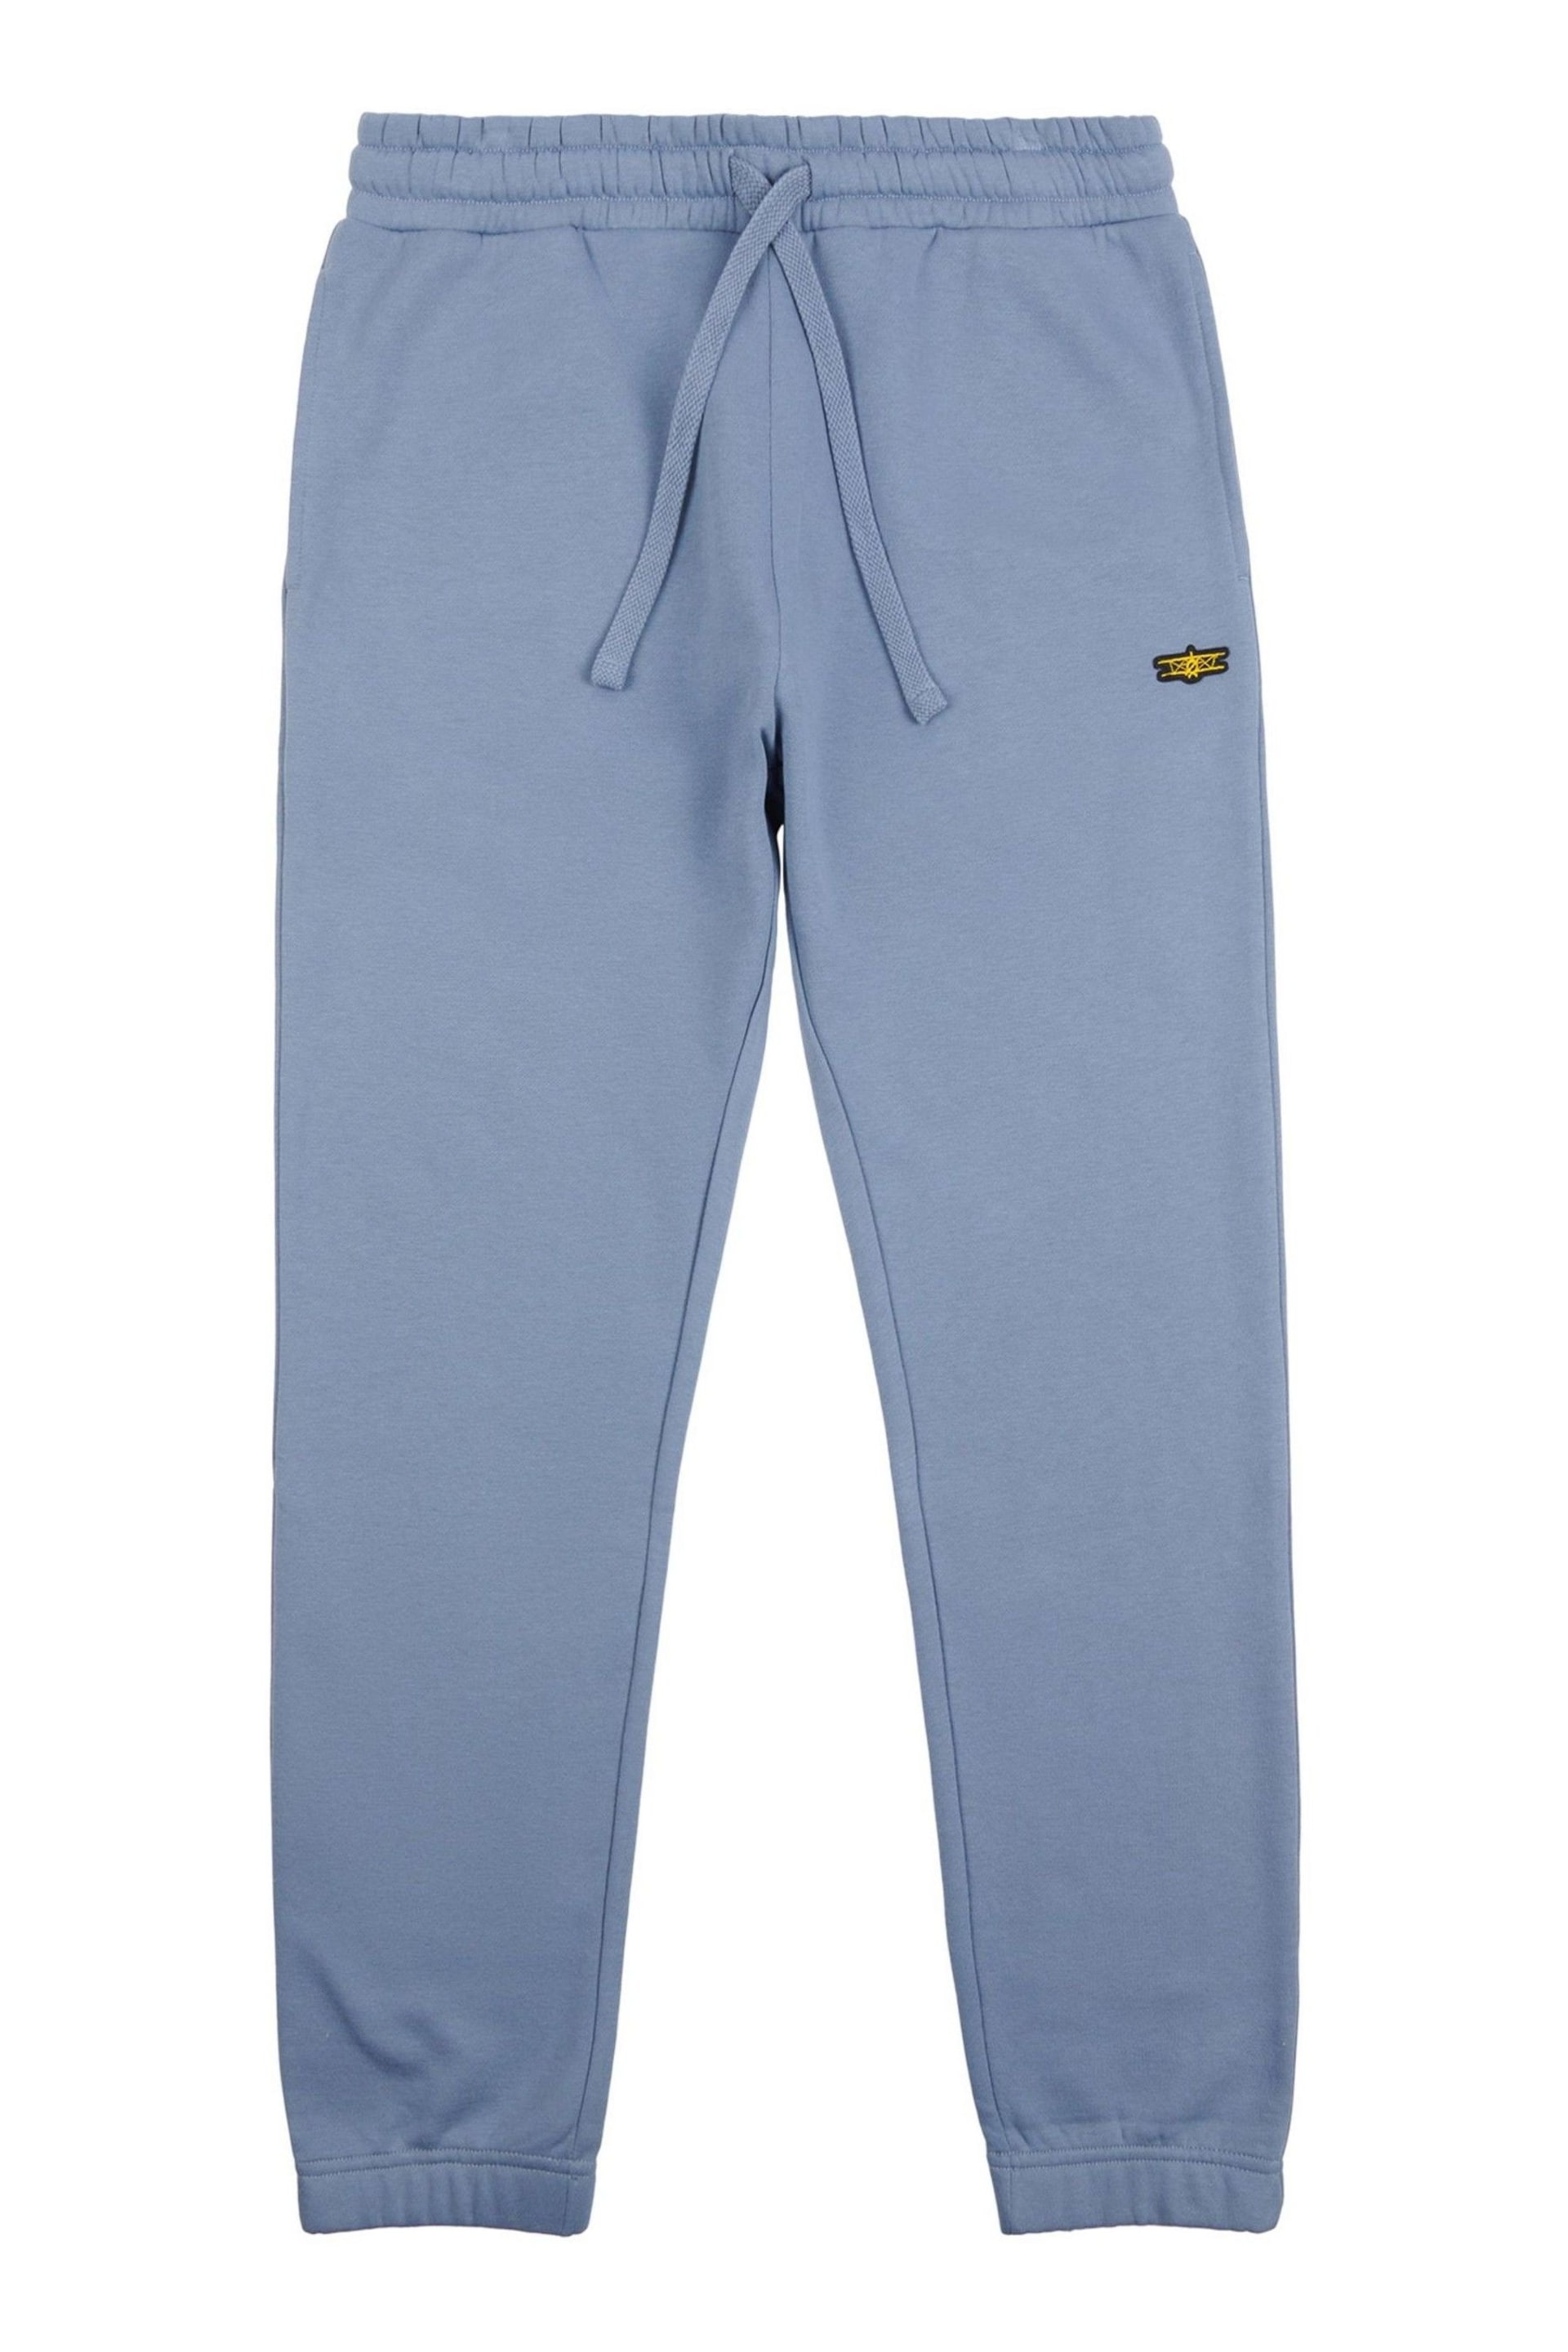 Flyers Mens Classic Fit Joggers - Image 6 of 8